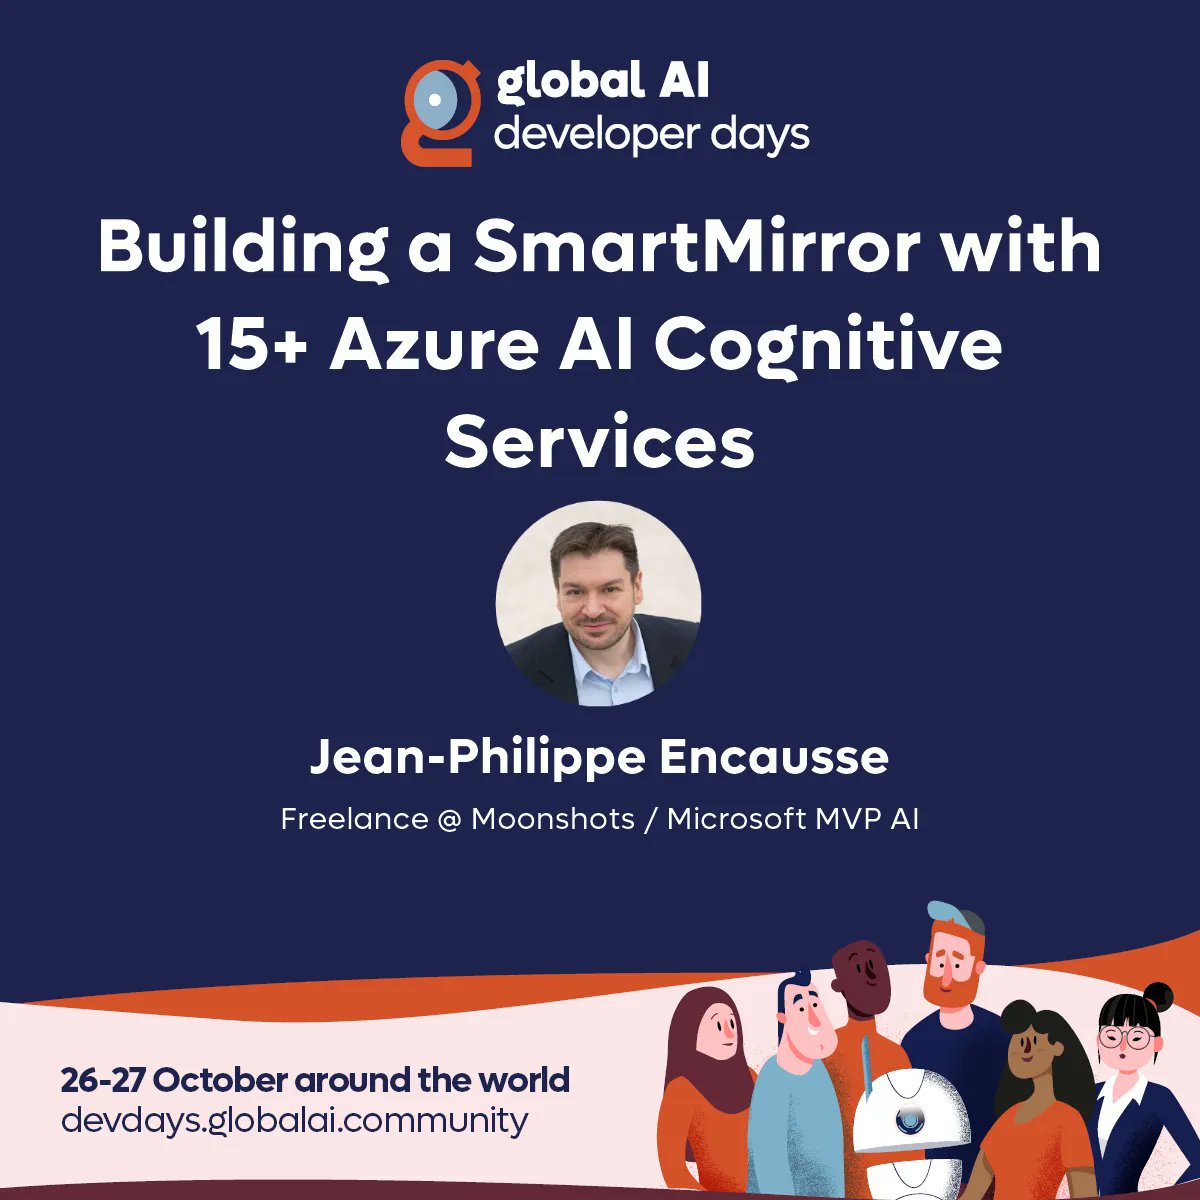 Join the #GlobalAIDeveloperDays this October for the #Hybrid #AI #Community event of the year! 📅 27 October | 15:00 UTC 🤩 Jean-Philippe Encausse (@JpEncausse) 📢 Building a SmartMirror with 15+ Azure AI Cognitive Services Register now on: buff.ly/3Sm5cgG